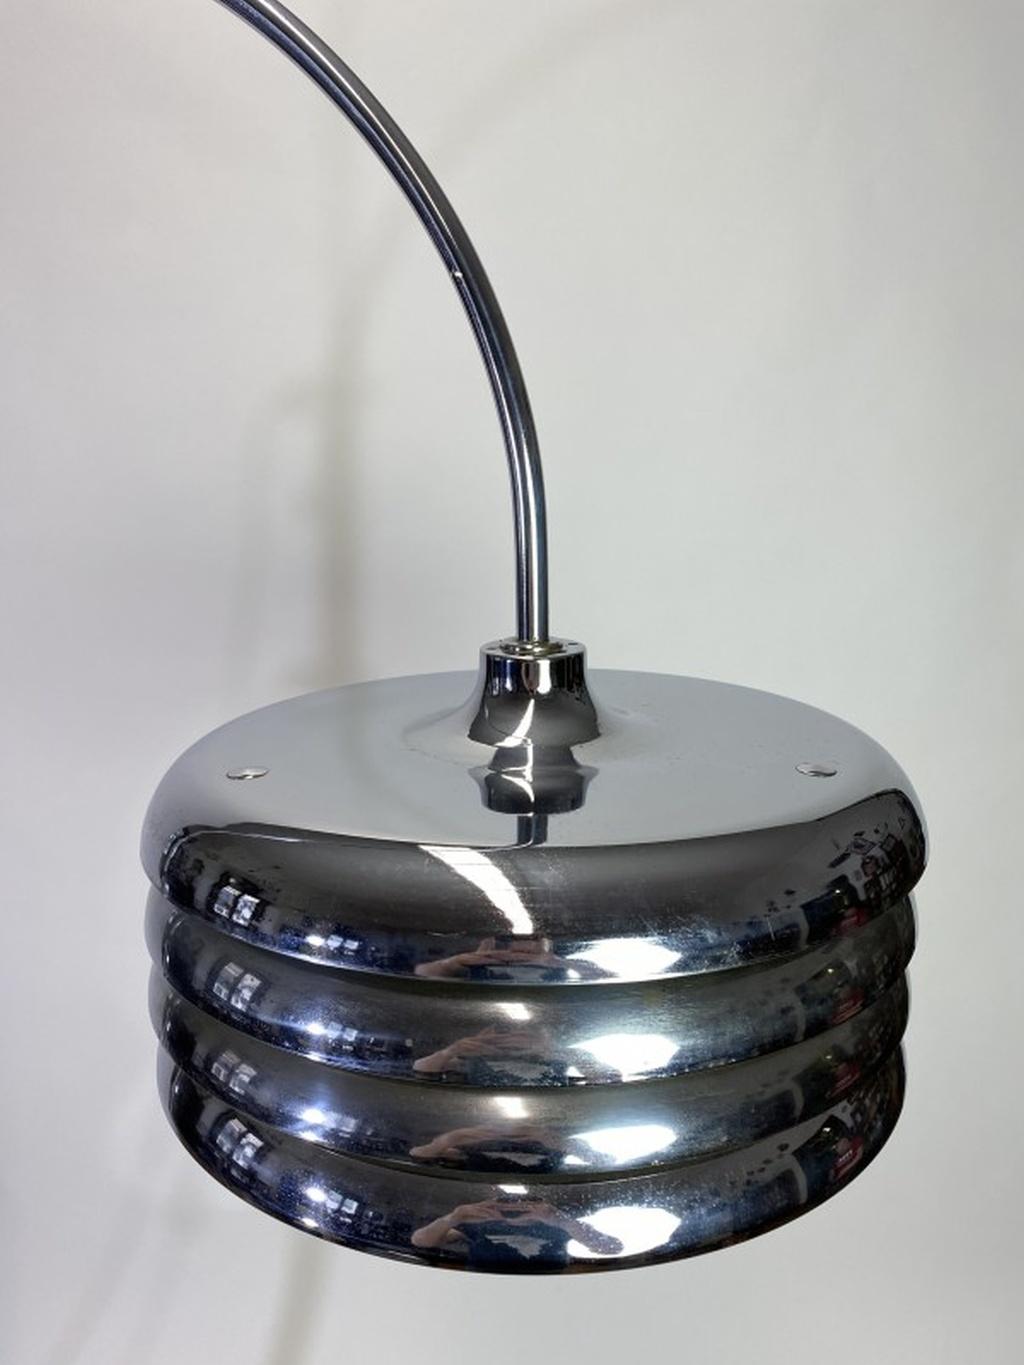 Floor lamp was designed by Tamás Borsfay and produced by the Hungarian Craftsmanship Company during the 1970s. The lamp features a layered disc lampshade on a chrome stem and solid base. The lampshade and half of the stem is adjustable.